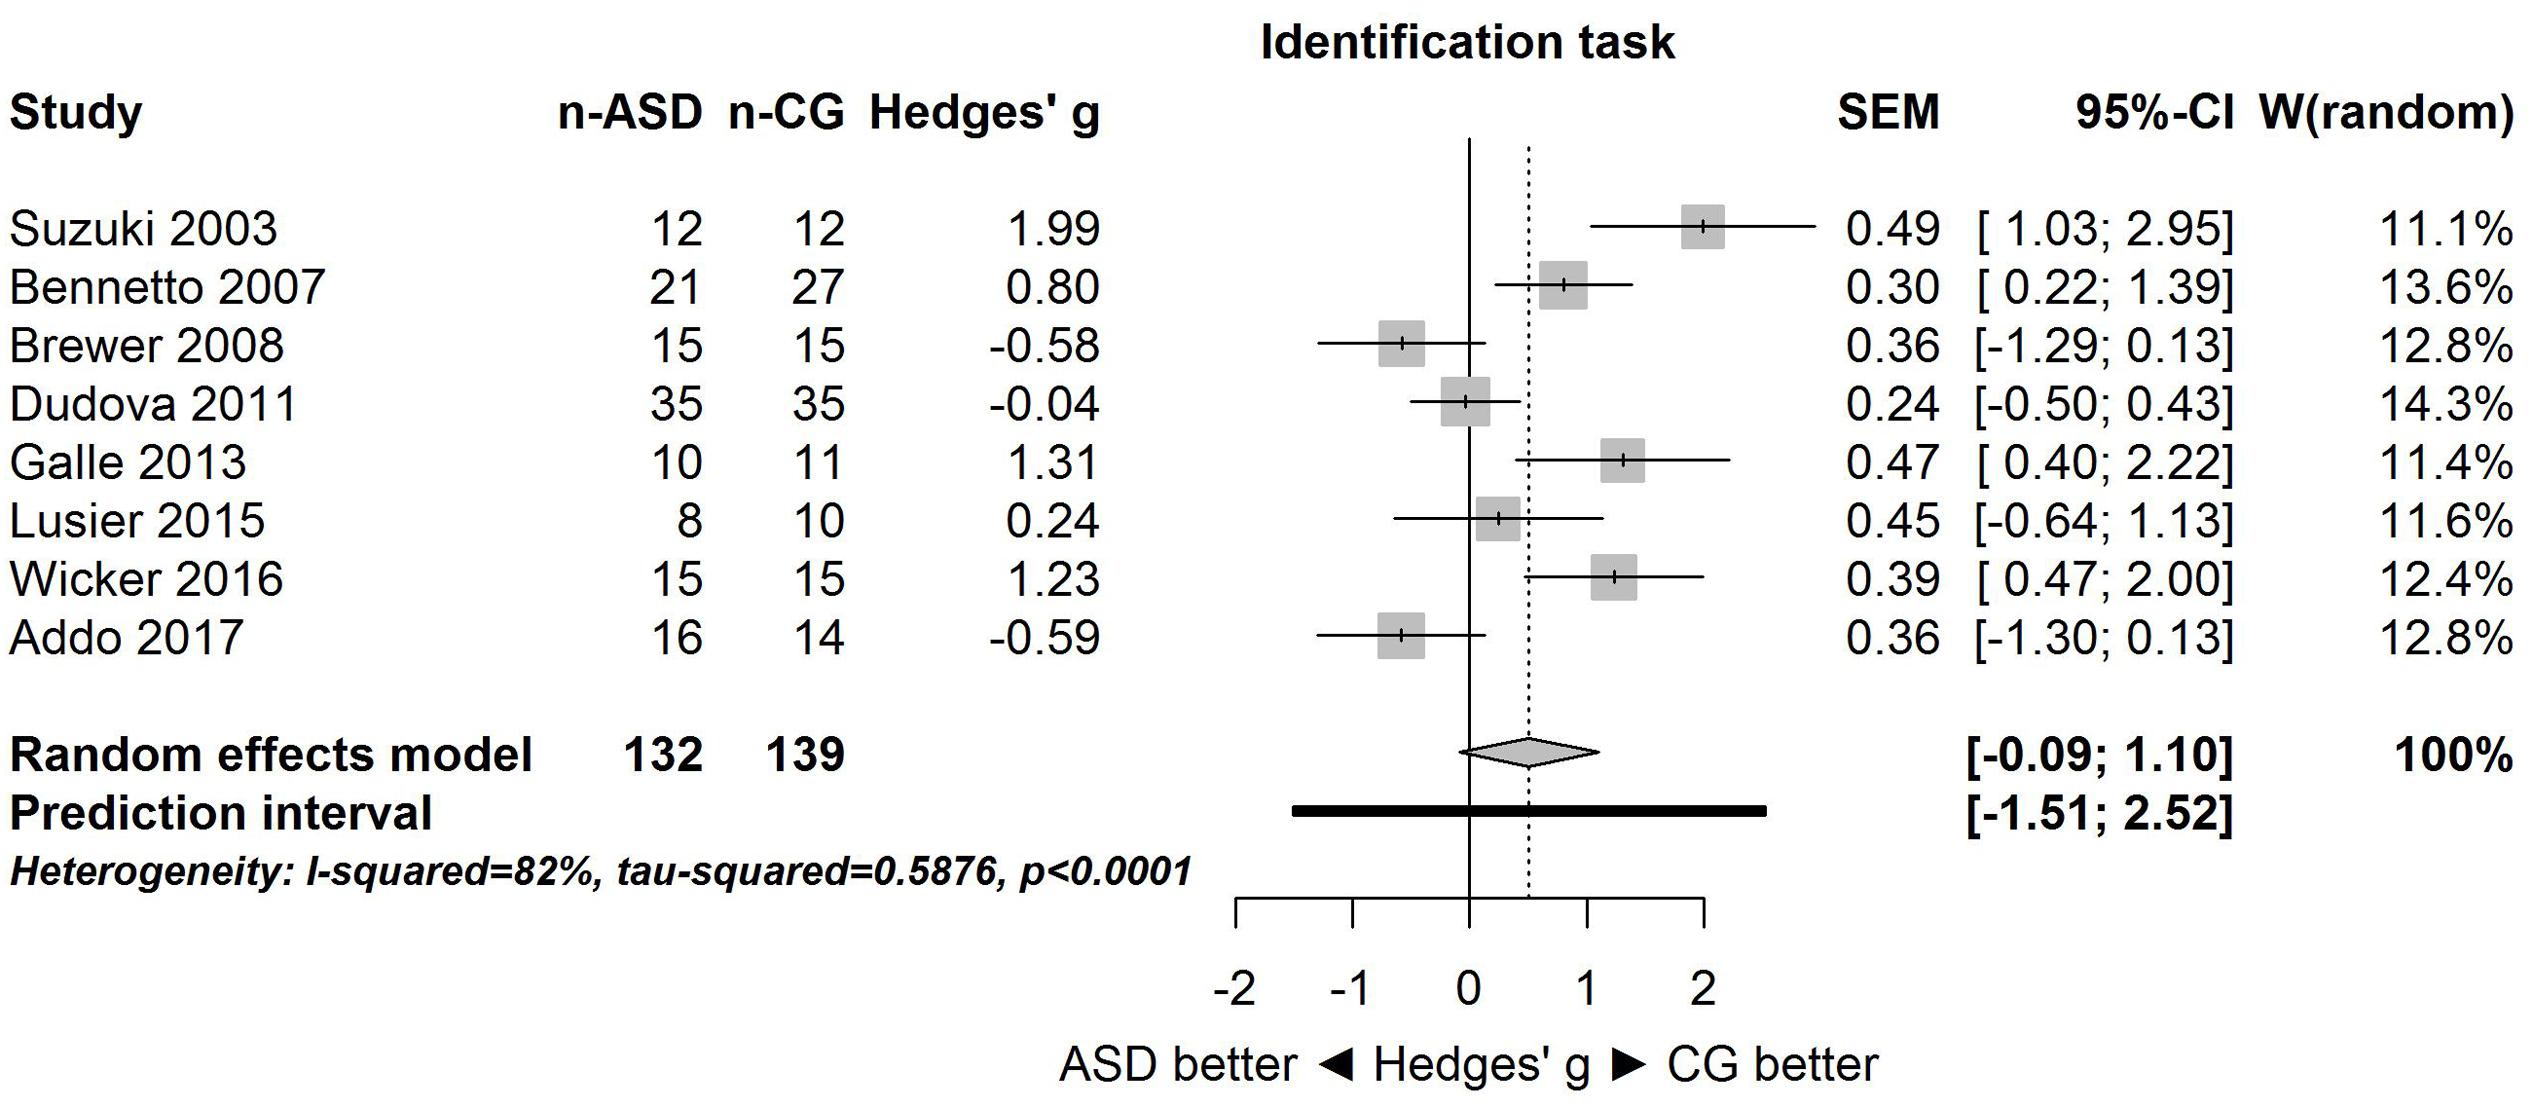 Frontiers A Meta-Analysis of Odor Thresholds and Odor Identification in Autism Spectrum Disorders image